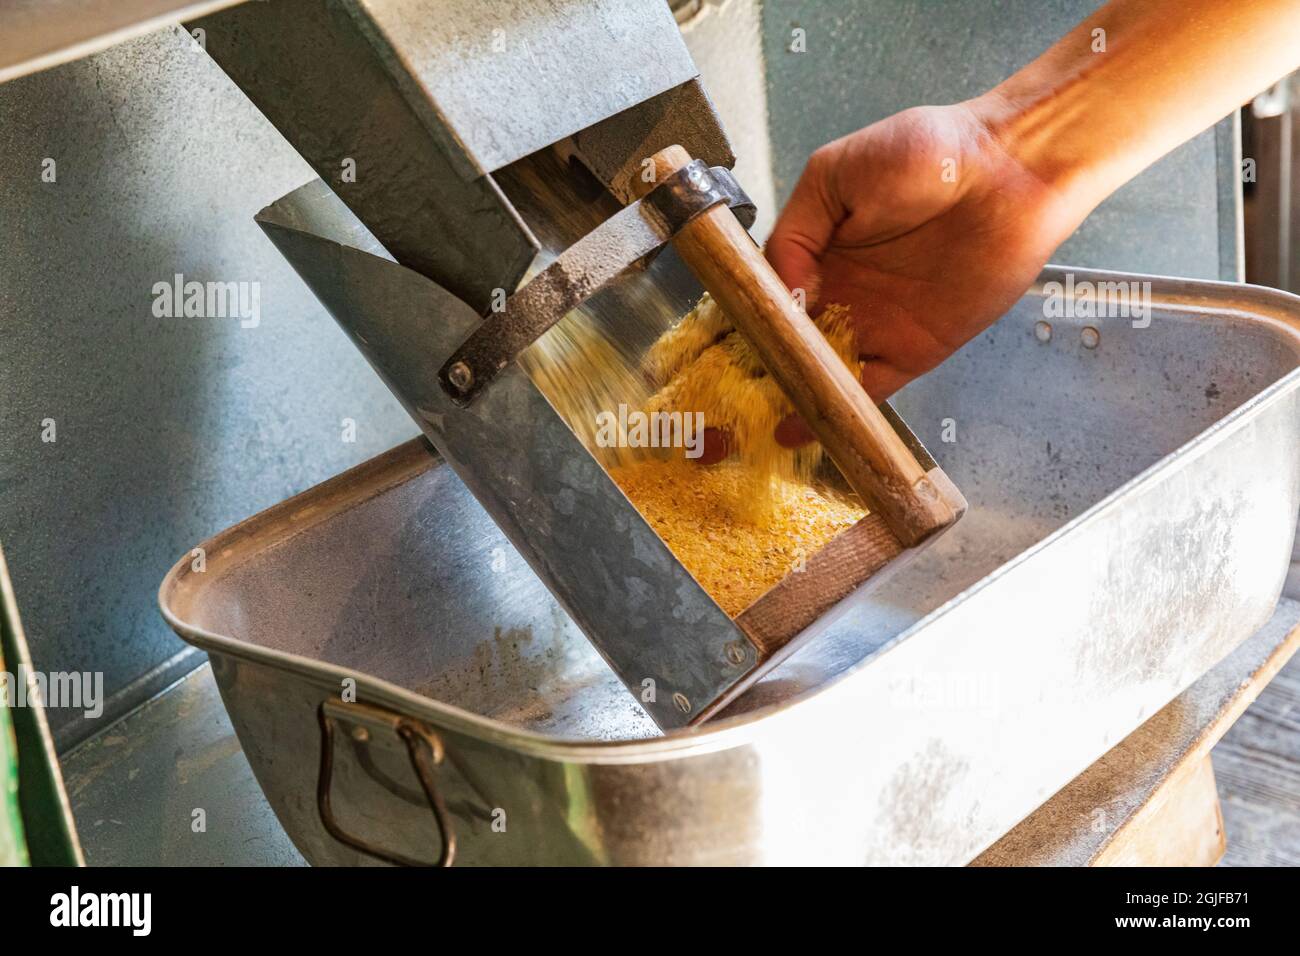 USA, Washington State, Woodland. Grain grinding equipment at the Cedar Creek Grist Mill. (Editorial Use Only) Stock Photo